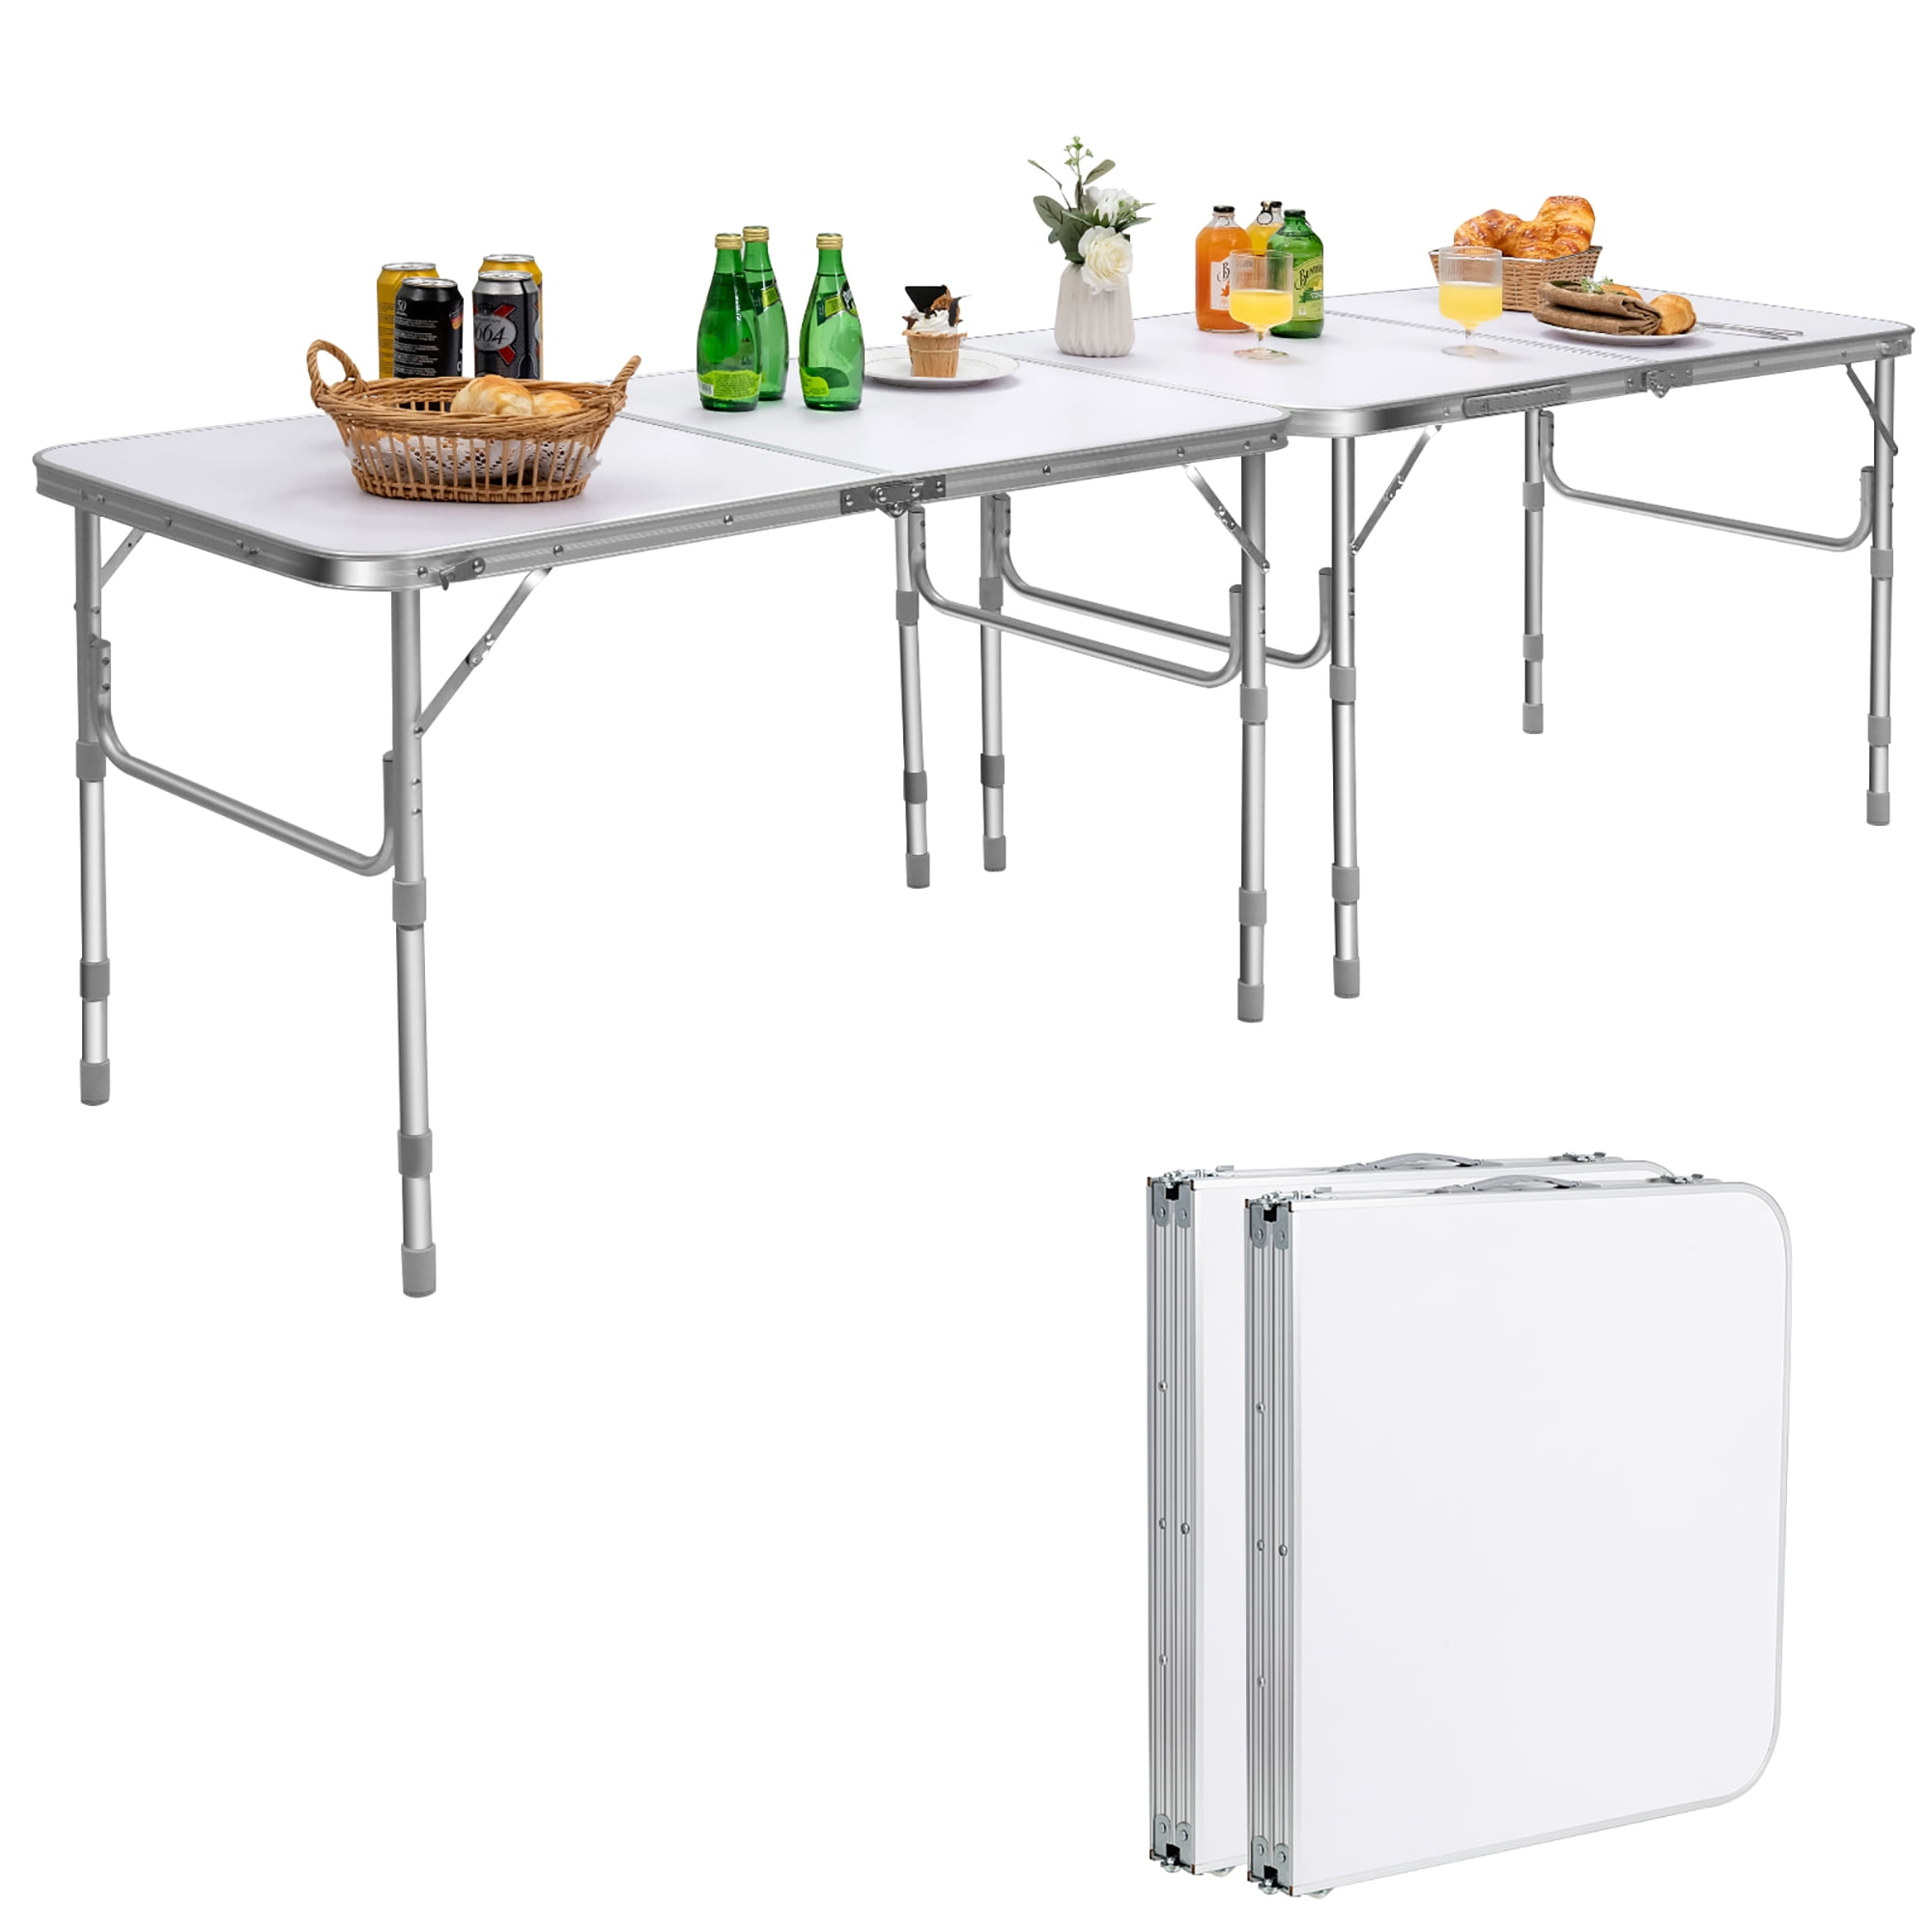 Aluminium Folding Table w/ Storage Adjustable Height Camping Outdoor Picnic BBQ 